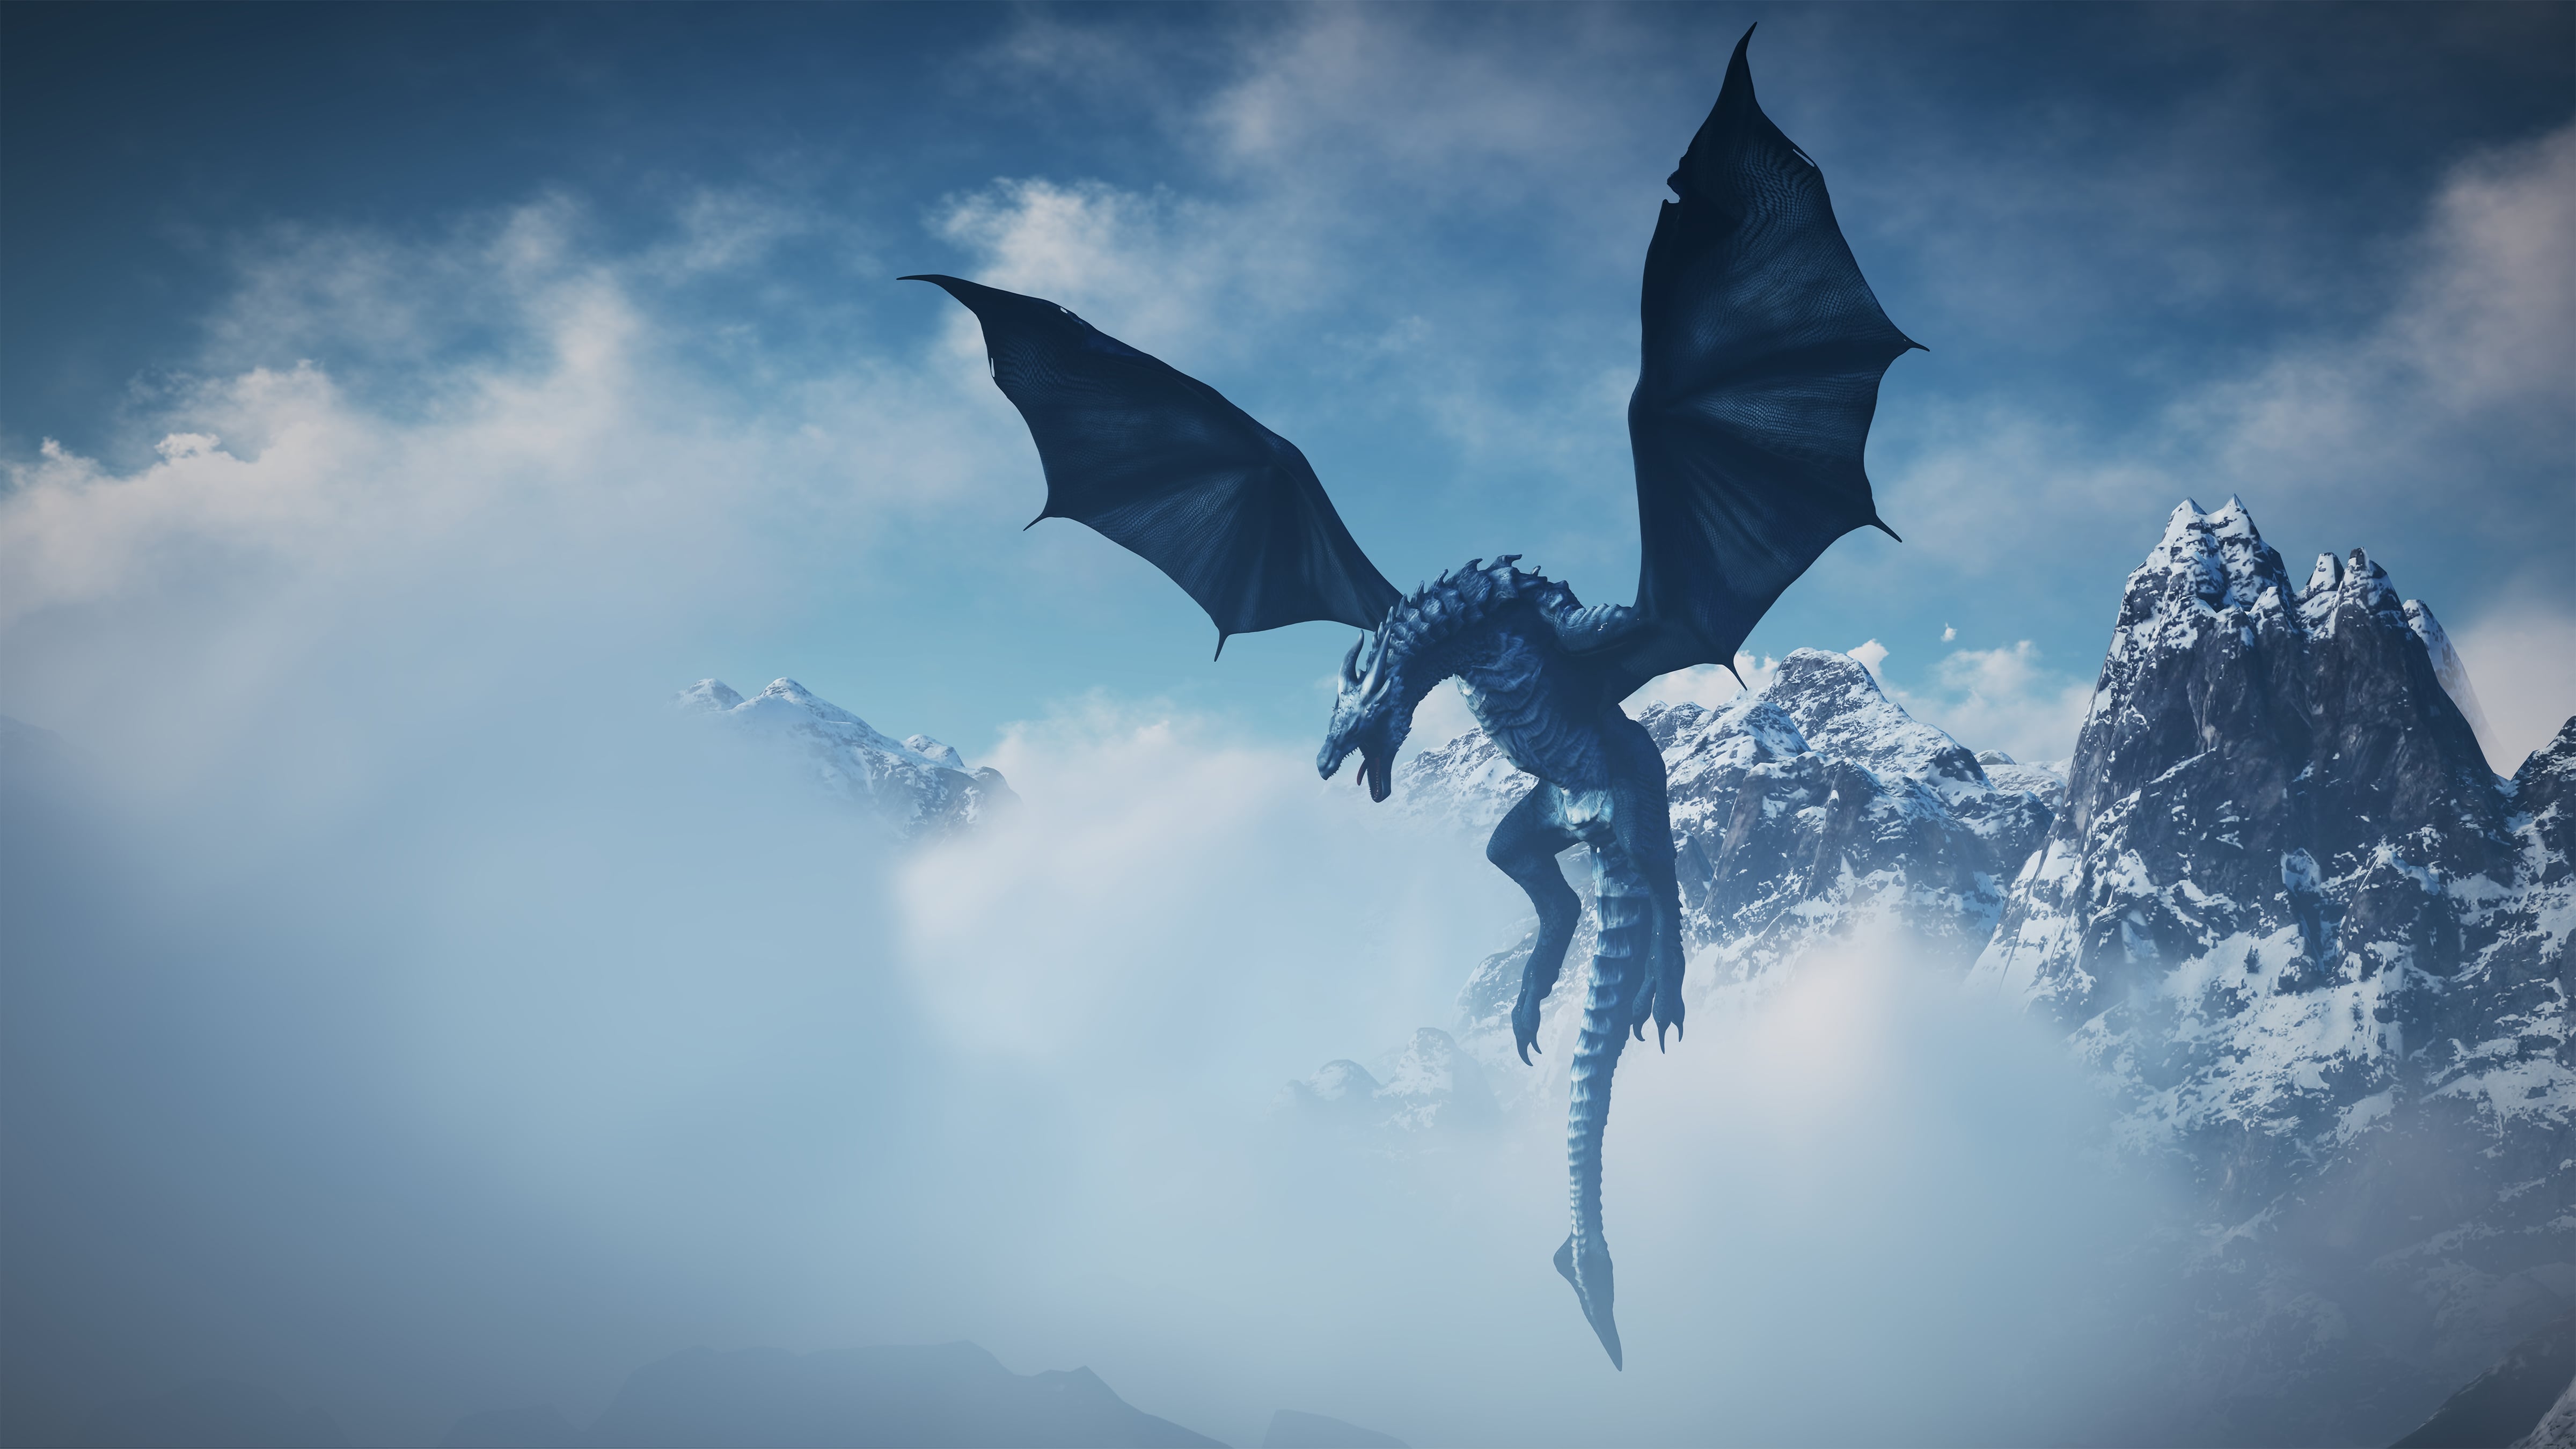 A dragon in snowy and misty mountains, an example of world-building.